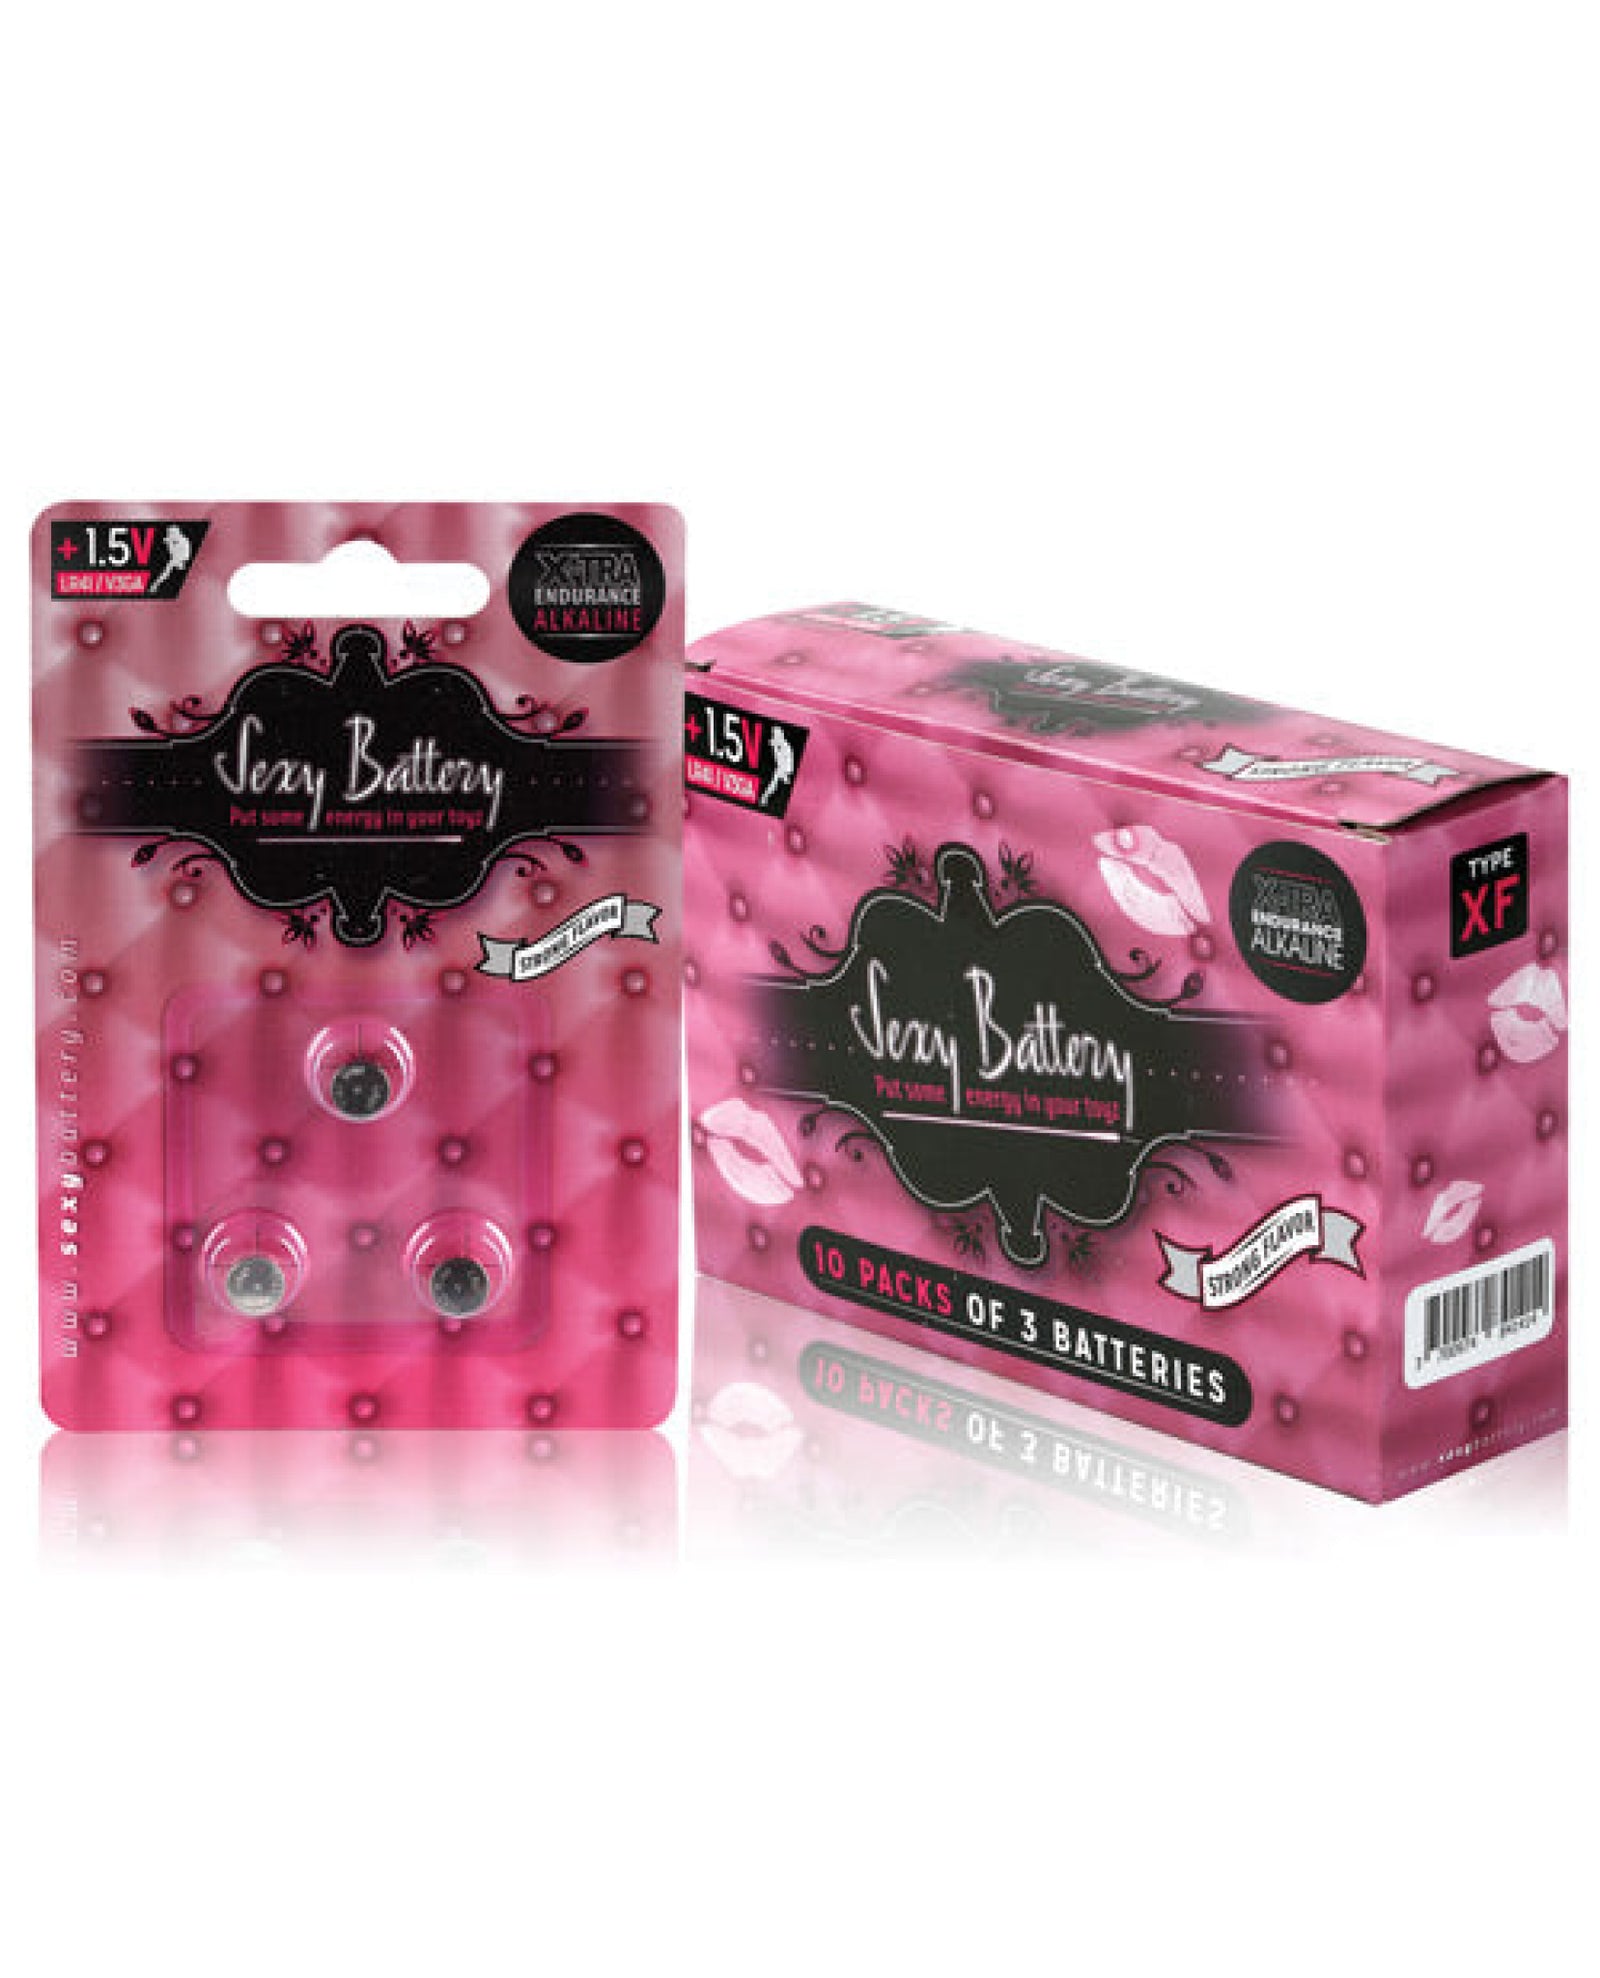 Sexy Battery Lr41 - 3g-a - Box Of 10 Three Packs Sexy Battery